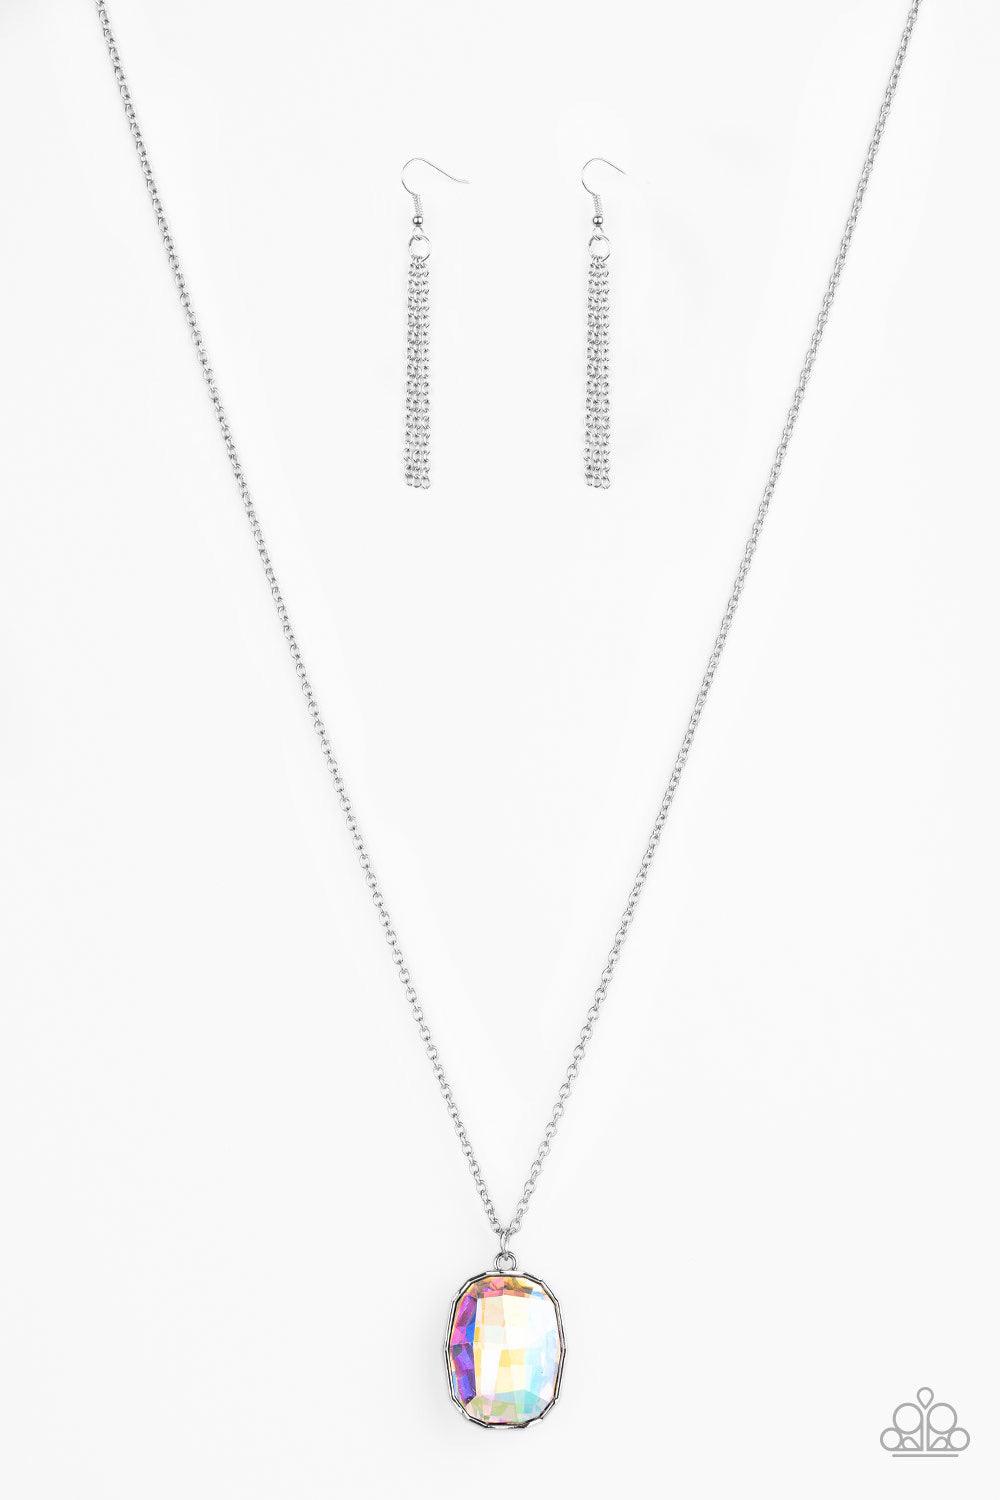 Paparazzi Accessories Imperfect Iridescence - Multi Featuring an oil spill finish, an imperfect gem is pressed into the center of an edgy silver frame at the bottom of a lengthened silver chain for a glitzy look. Features an adjustable clasp closure. Sold